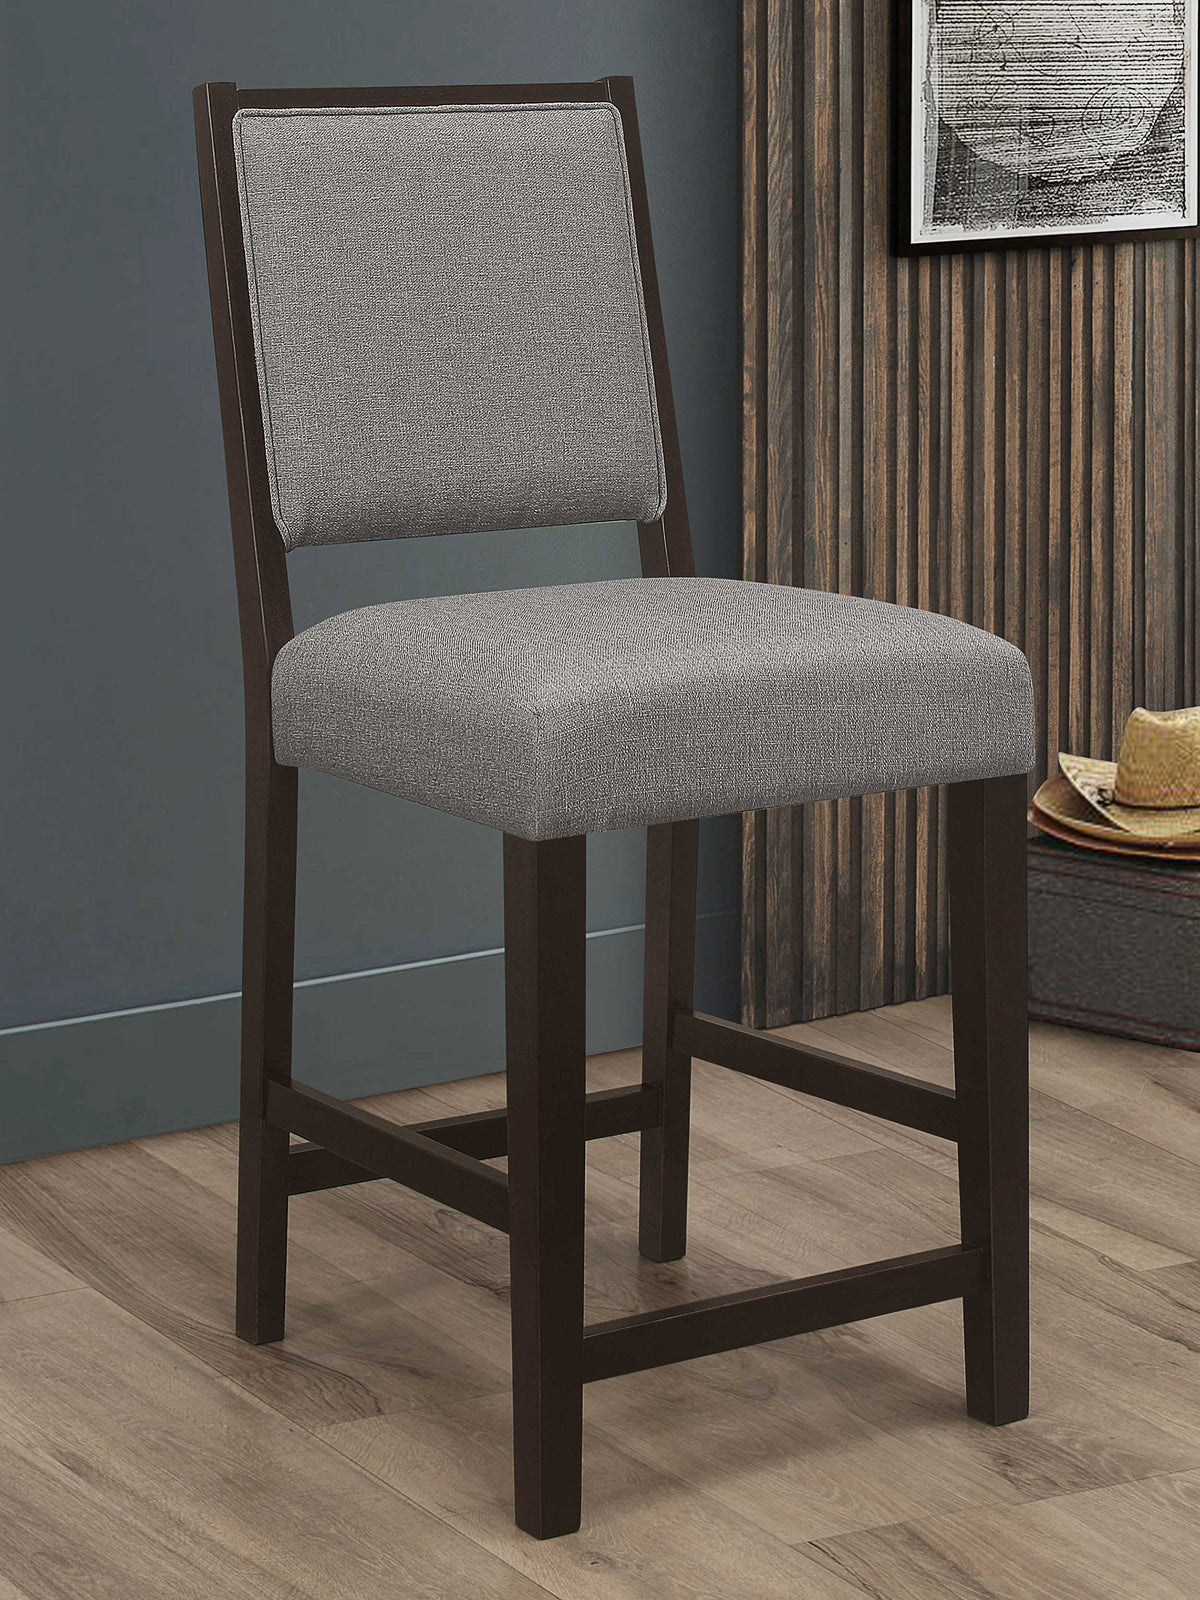 Bedford Upholstered Open Back Counter Height Stools with Footrest (Set of 2) Grey and Espresso Bedford Upholstered Open Back Counter Height Stools with Footrest (Set of 2) Grey and Espresso Half Price Furniture